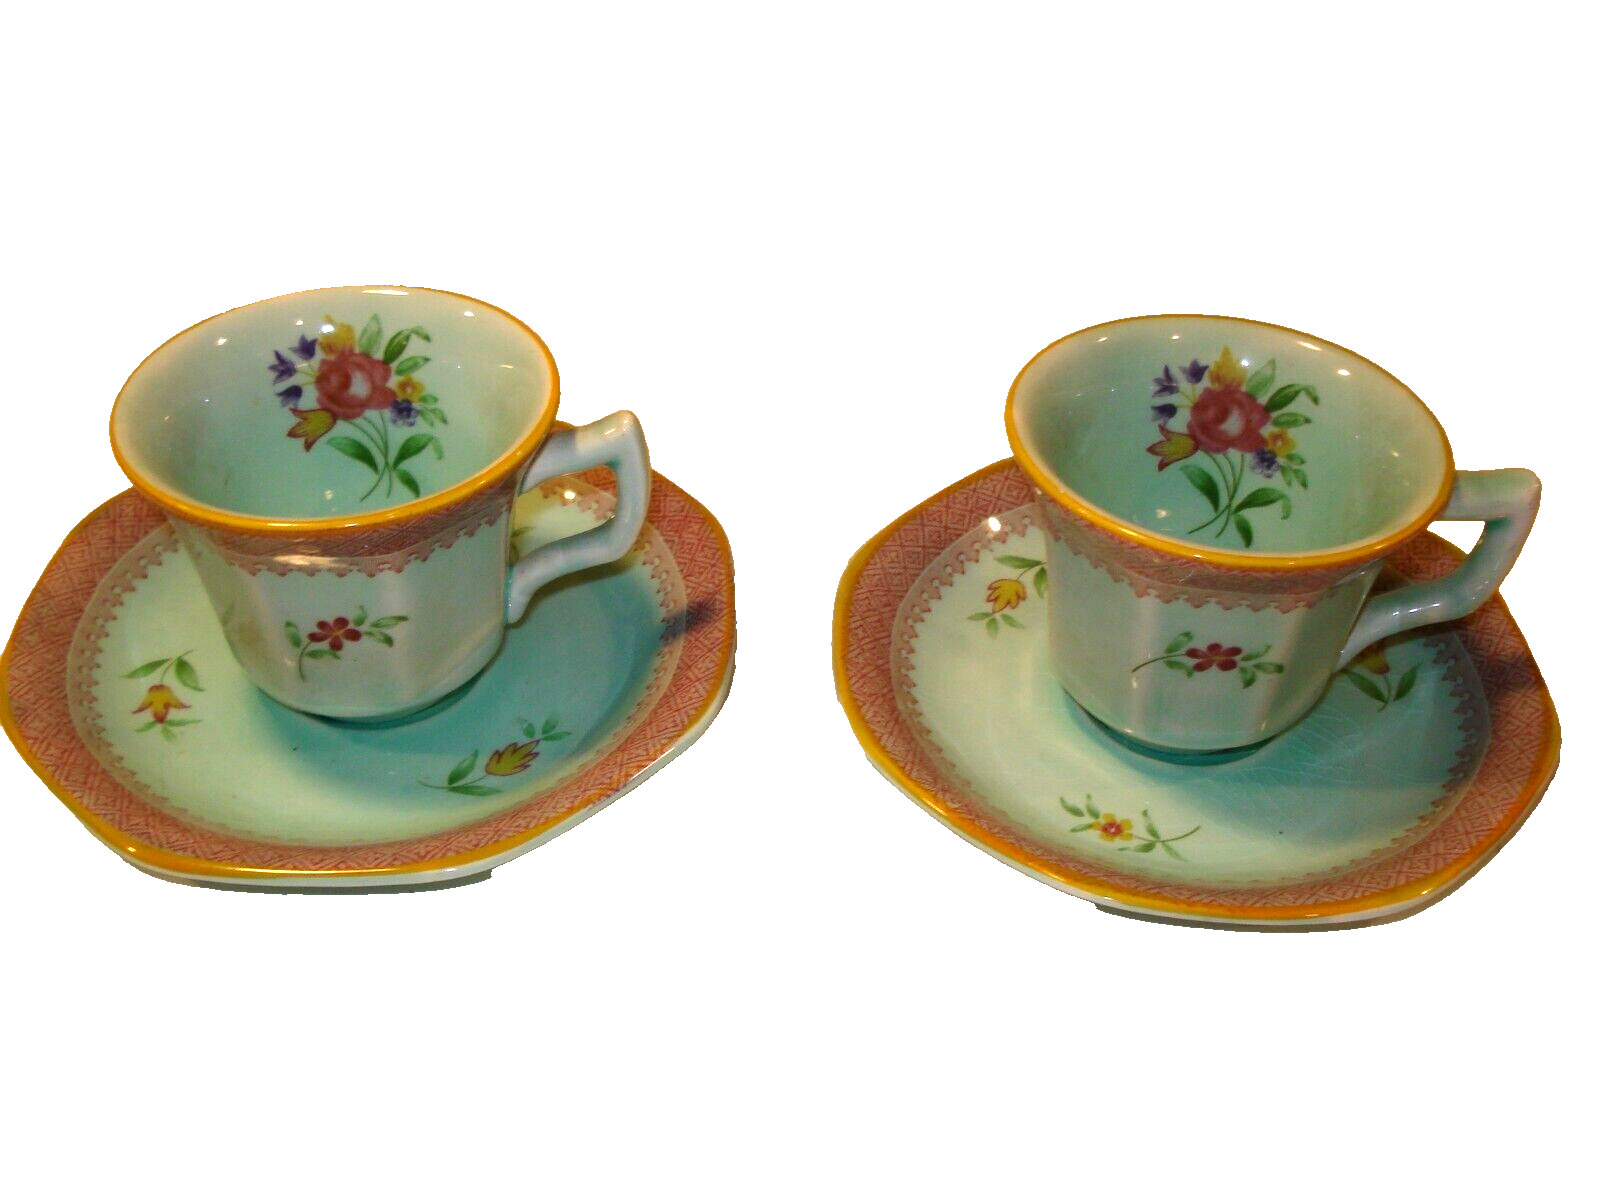 2 Adams Calyx Ware Wedgwood DEMI Expresso Cups & Saucers Lowerstoft England